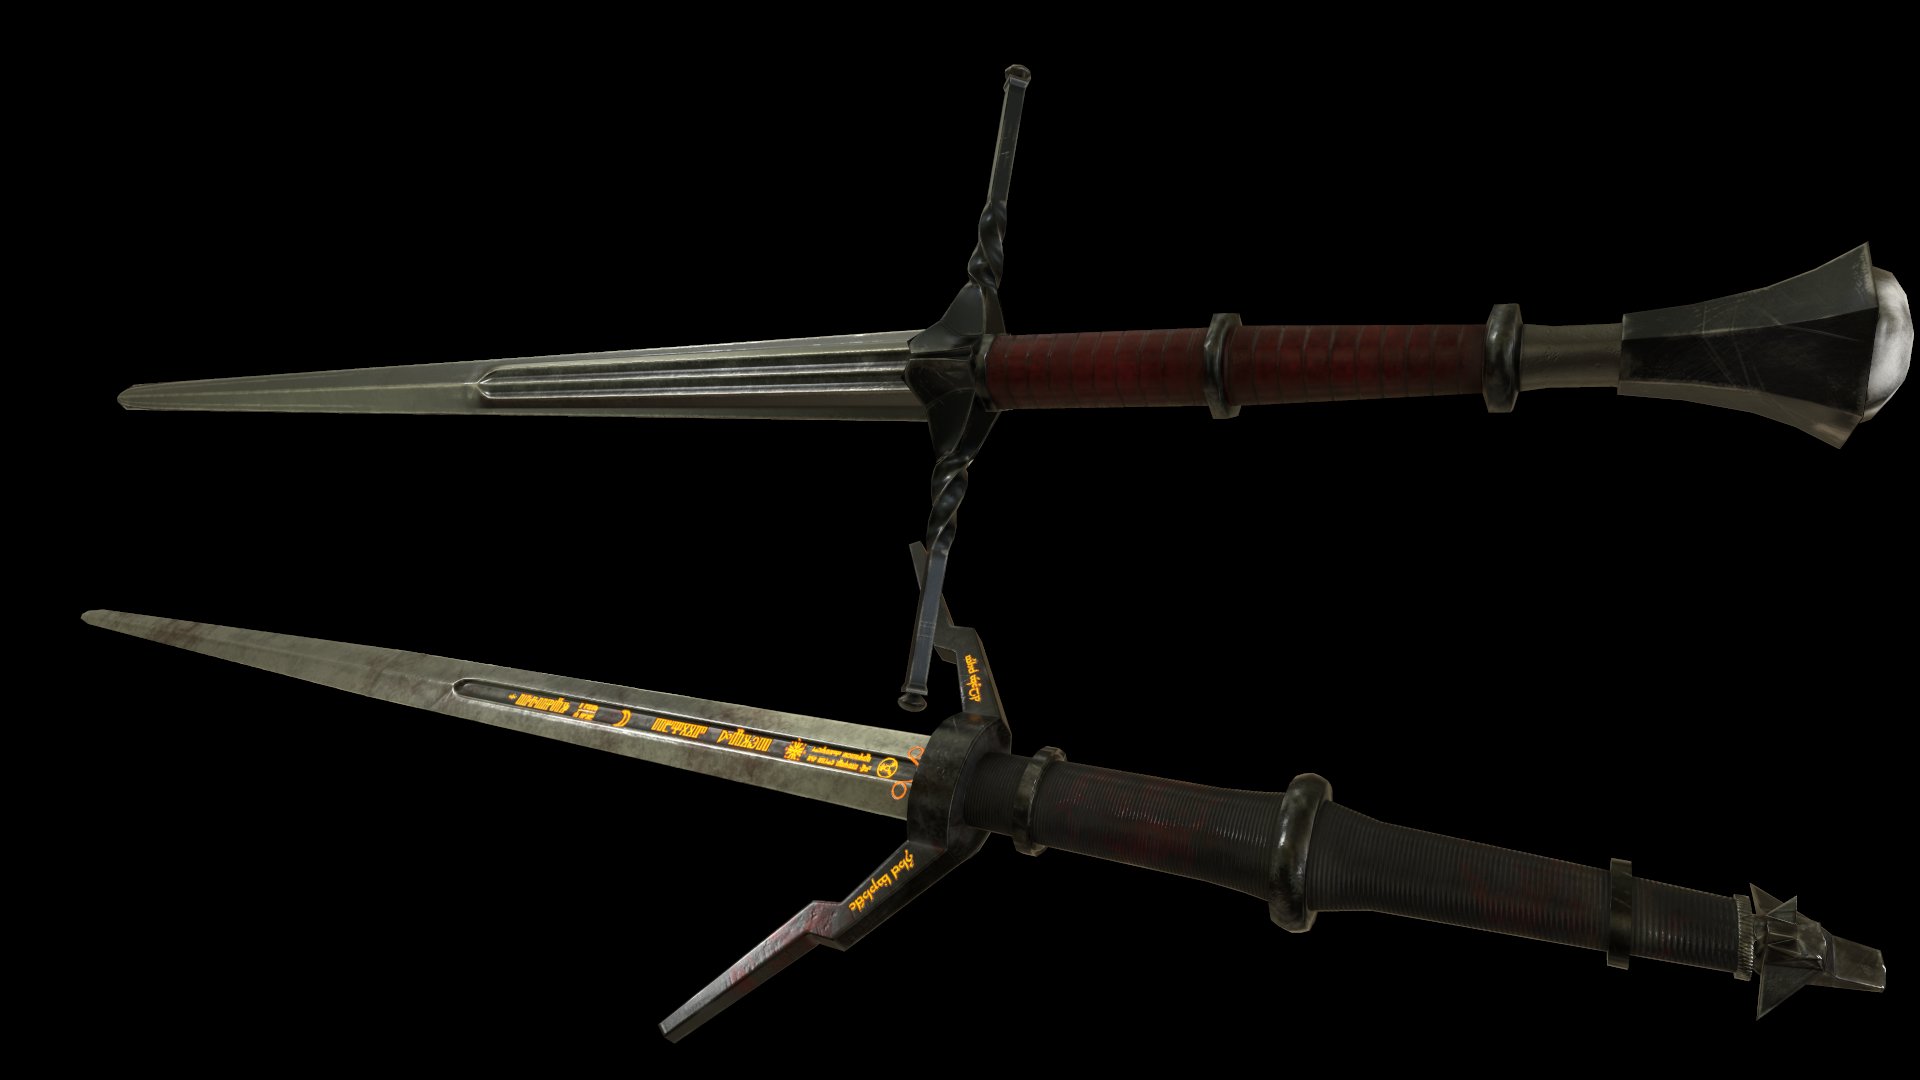 The witcher 3 e3 swords фото 41